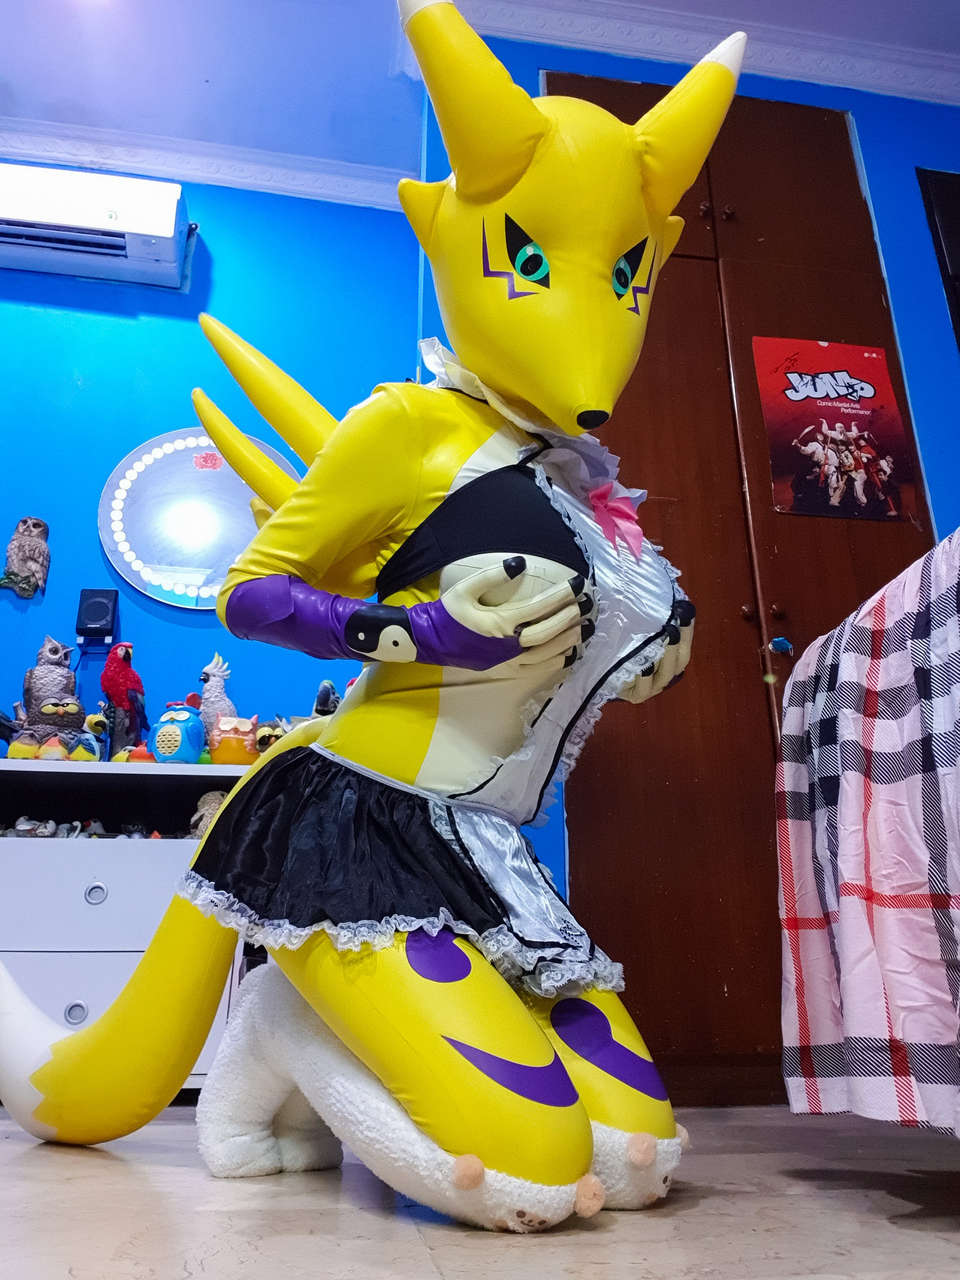 Rena The Renamon In Maid Outfit By Ncad Late